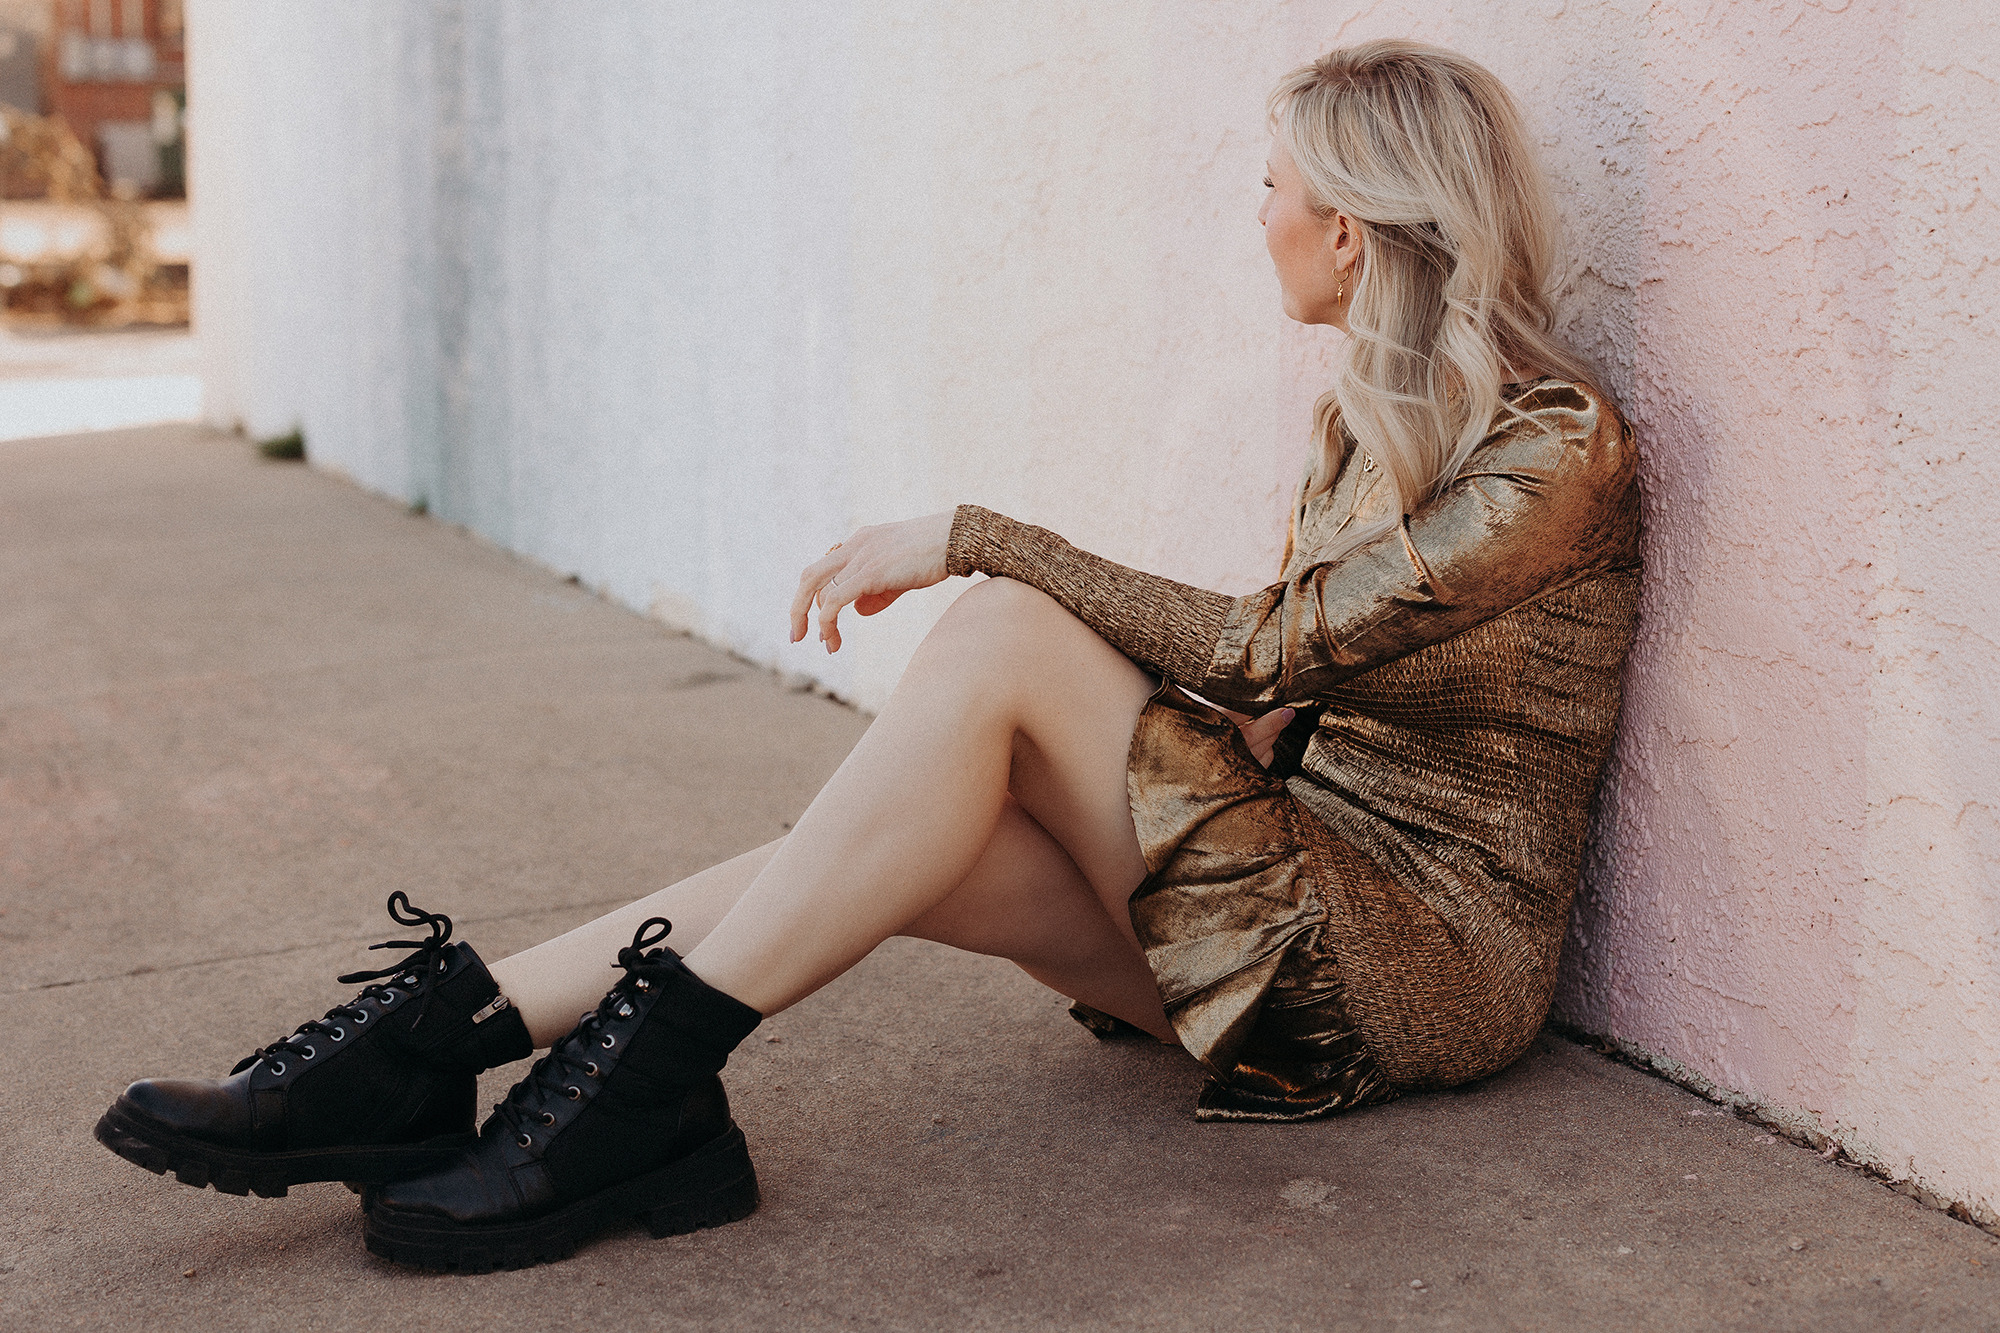 woman sitting on ground in denver wearing short gold dress and black boots